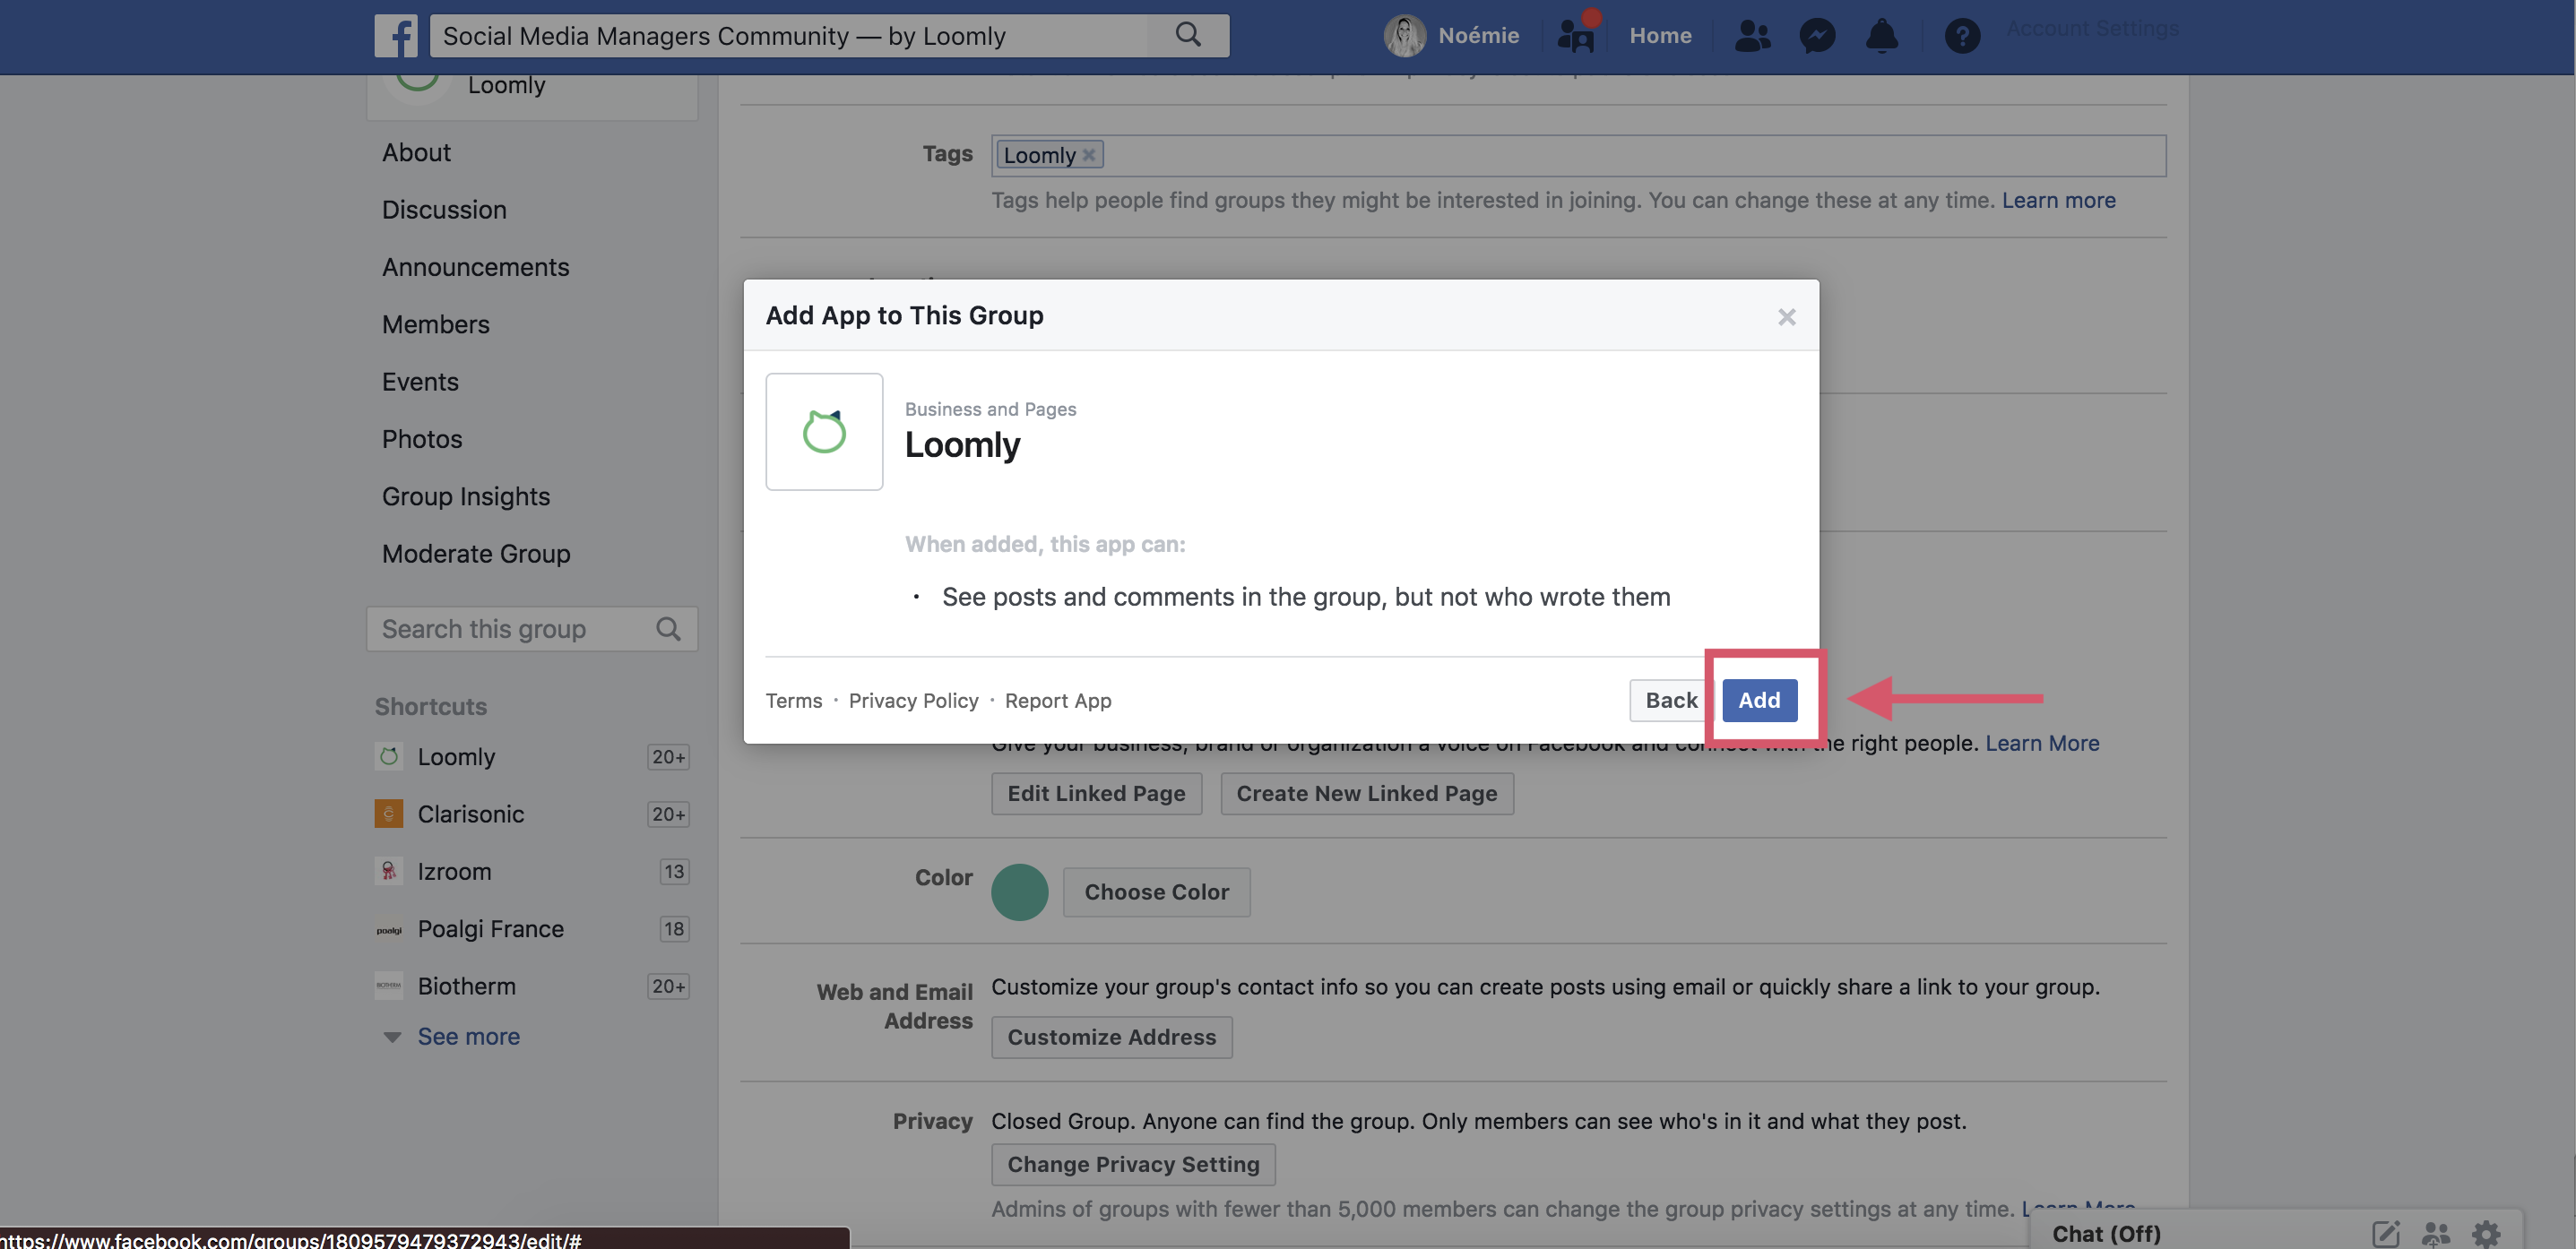 Publishing to Facebook Groups add Loomly